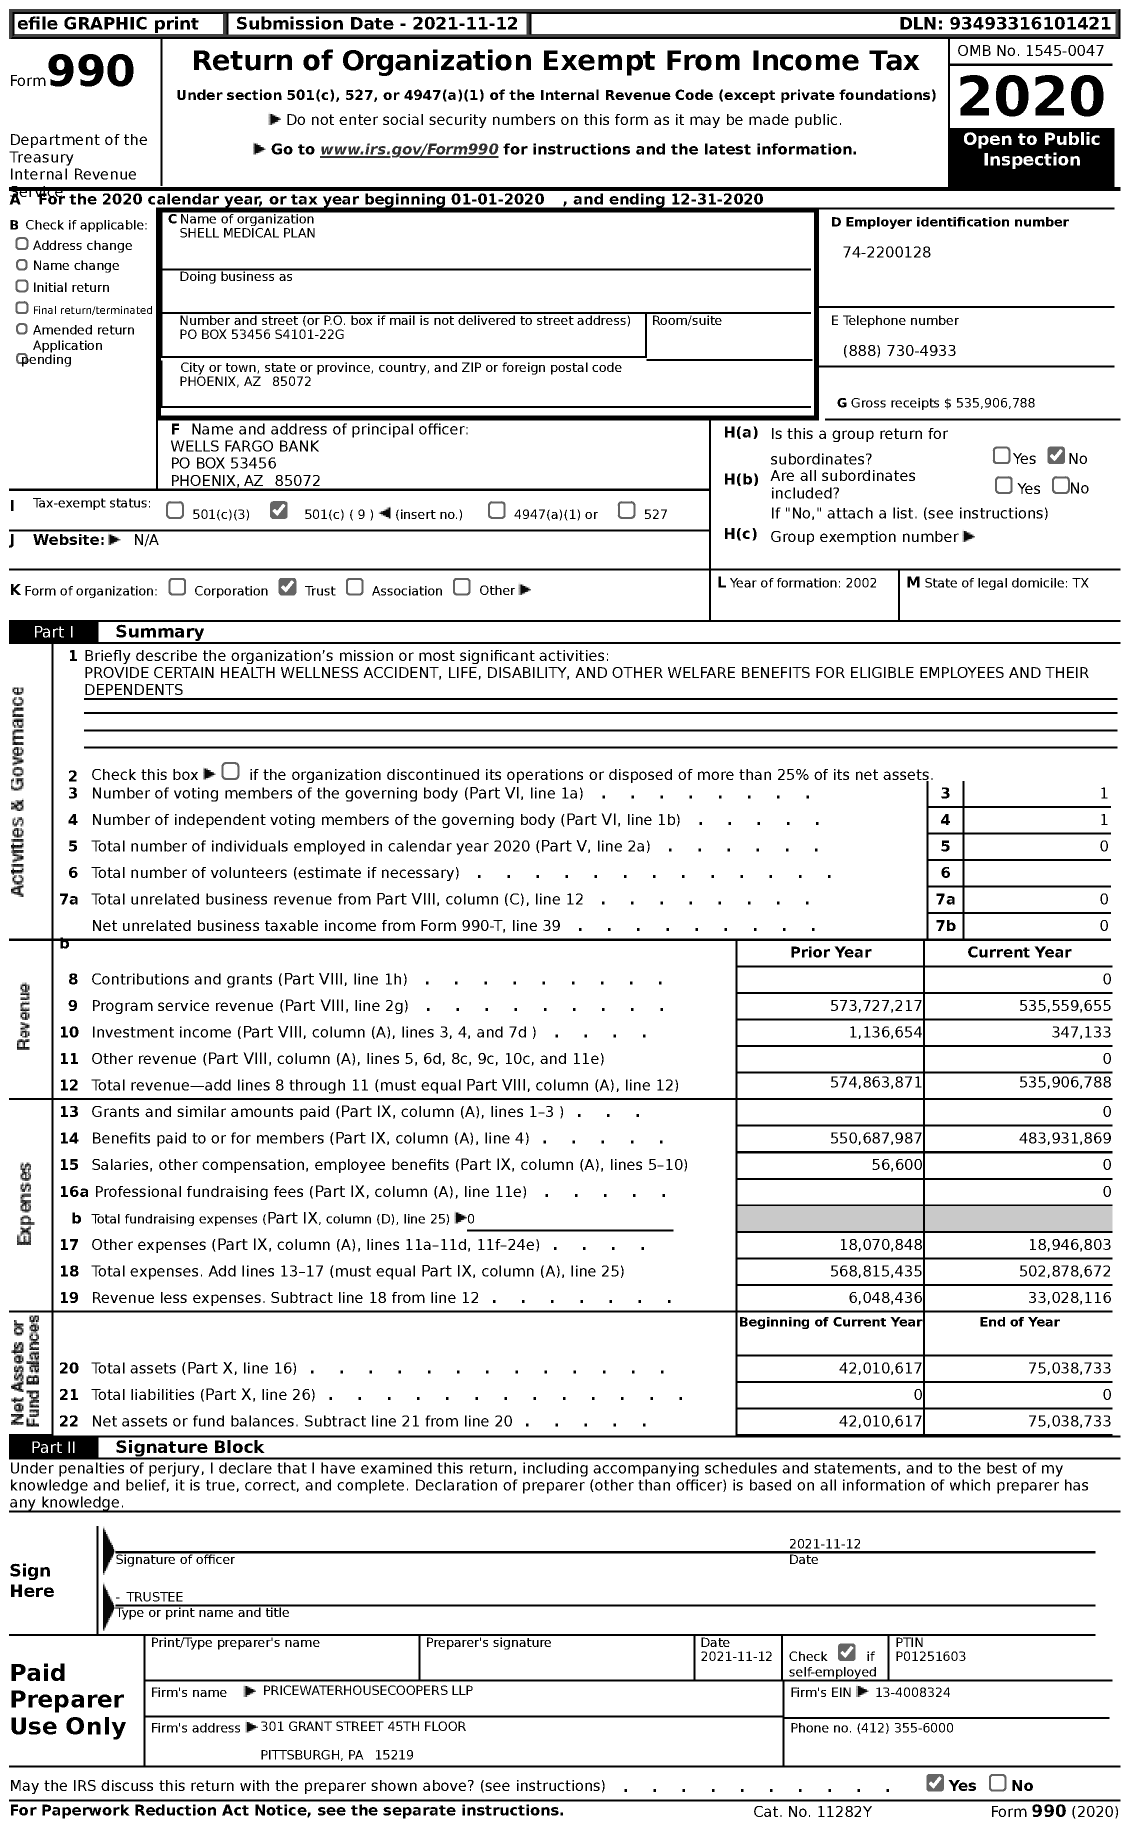 Image of first page of 2020 Form 990 for Shell Medical Plan